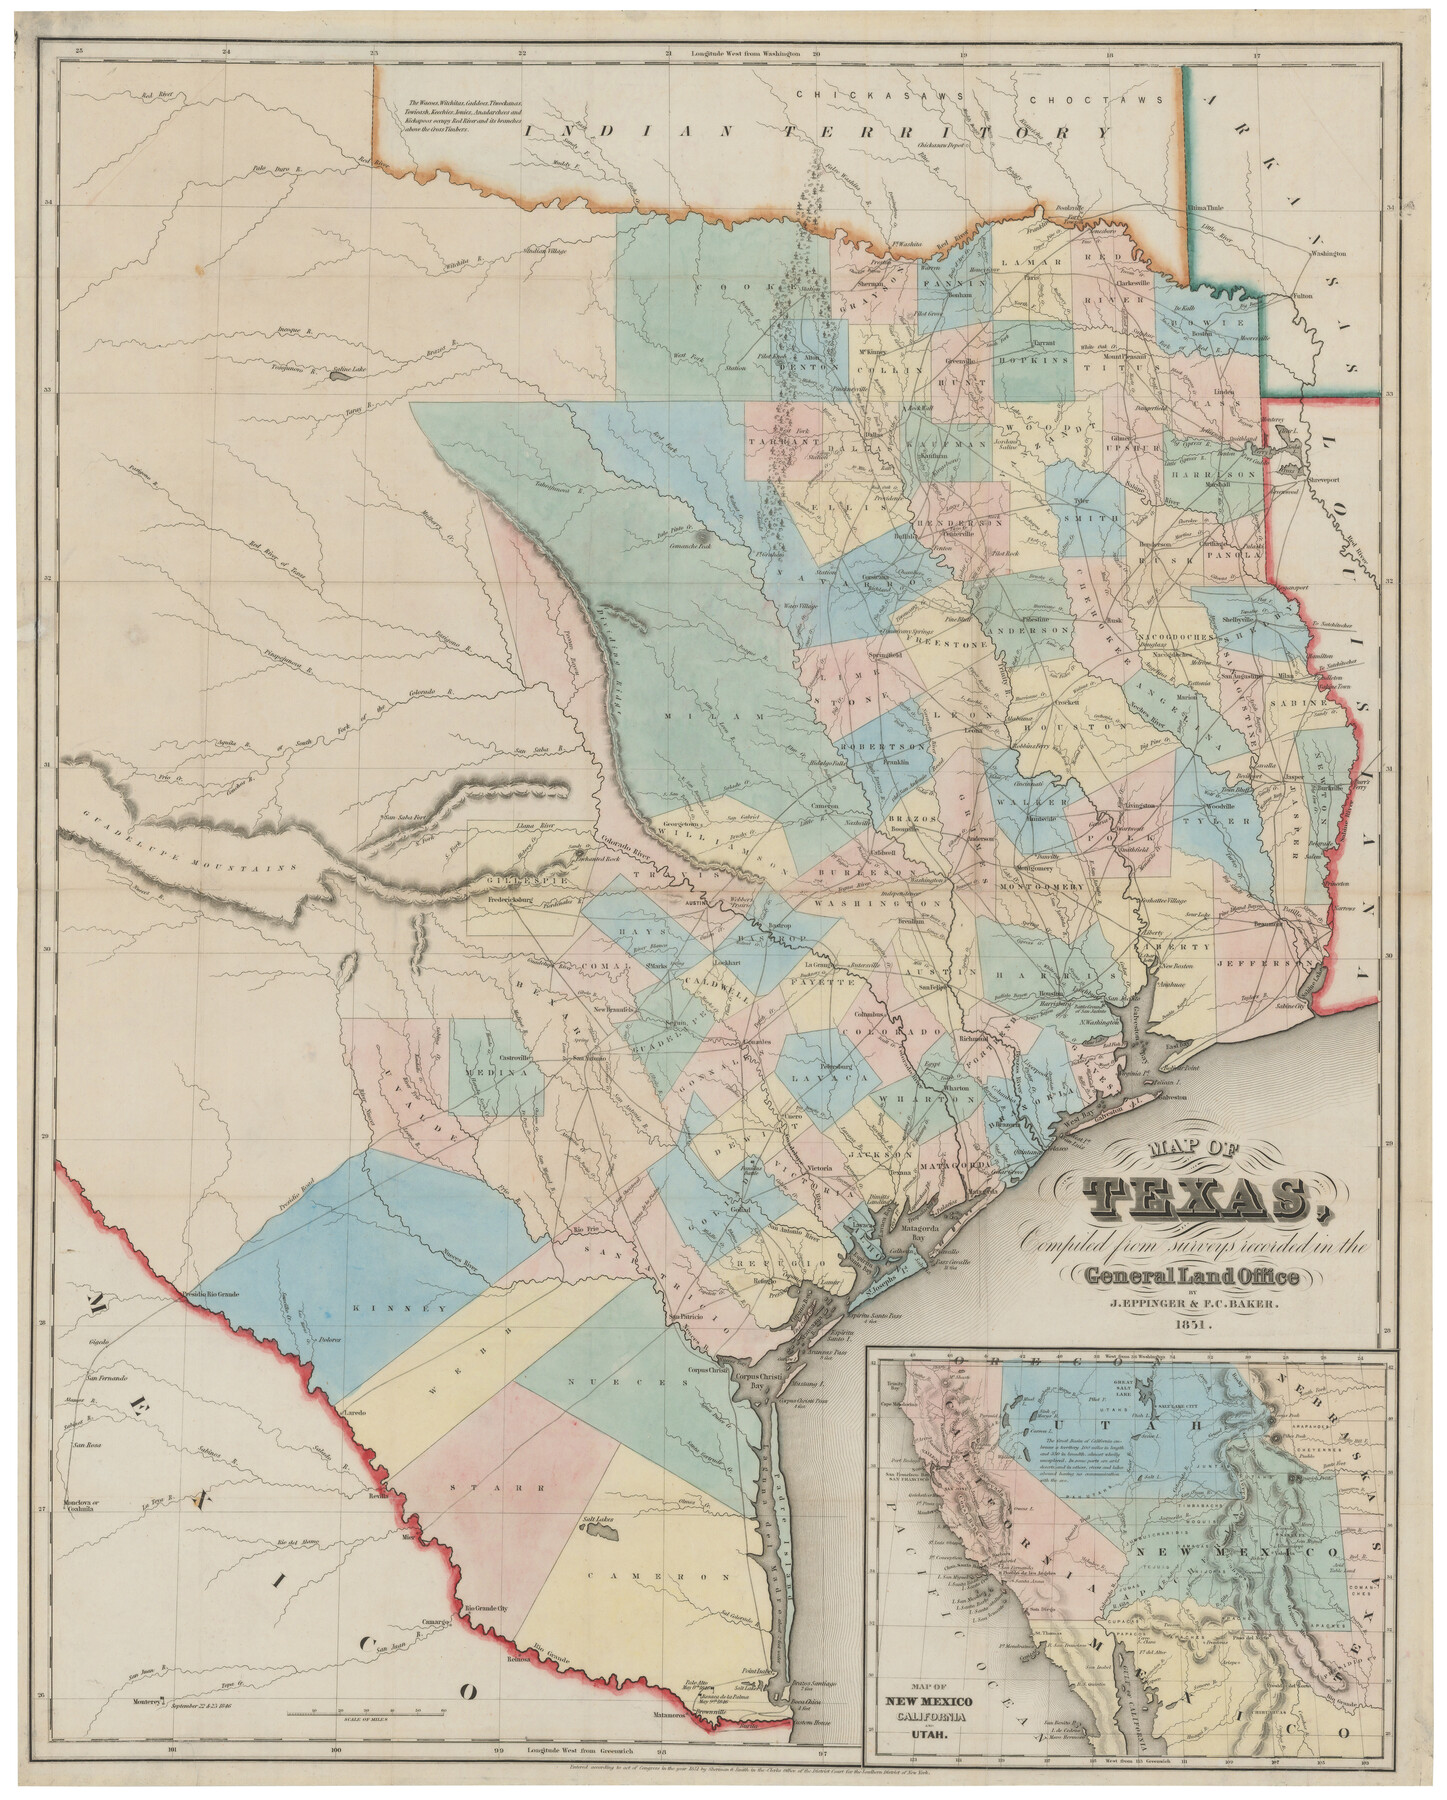 94417, Map of Texas compiled from surveys included in the General Land Office, Holcomb Digital Map Collection